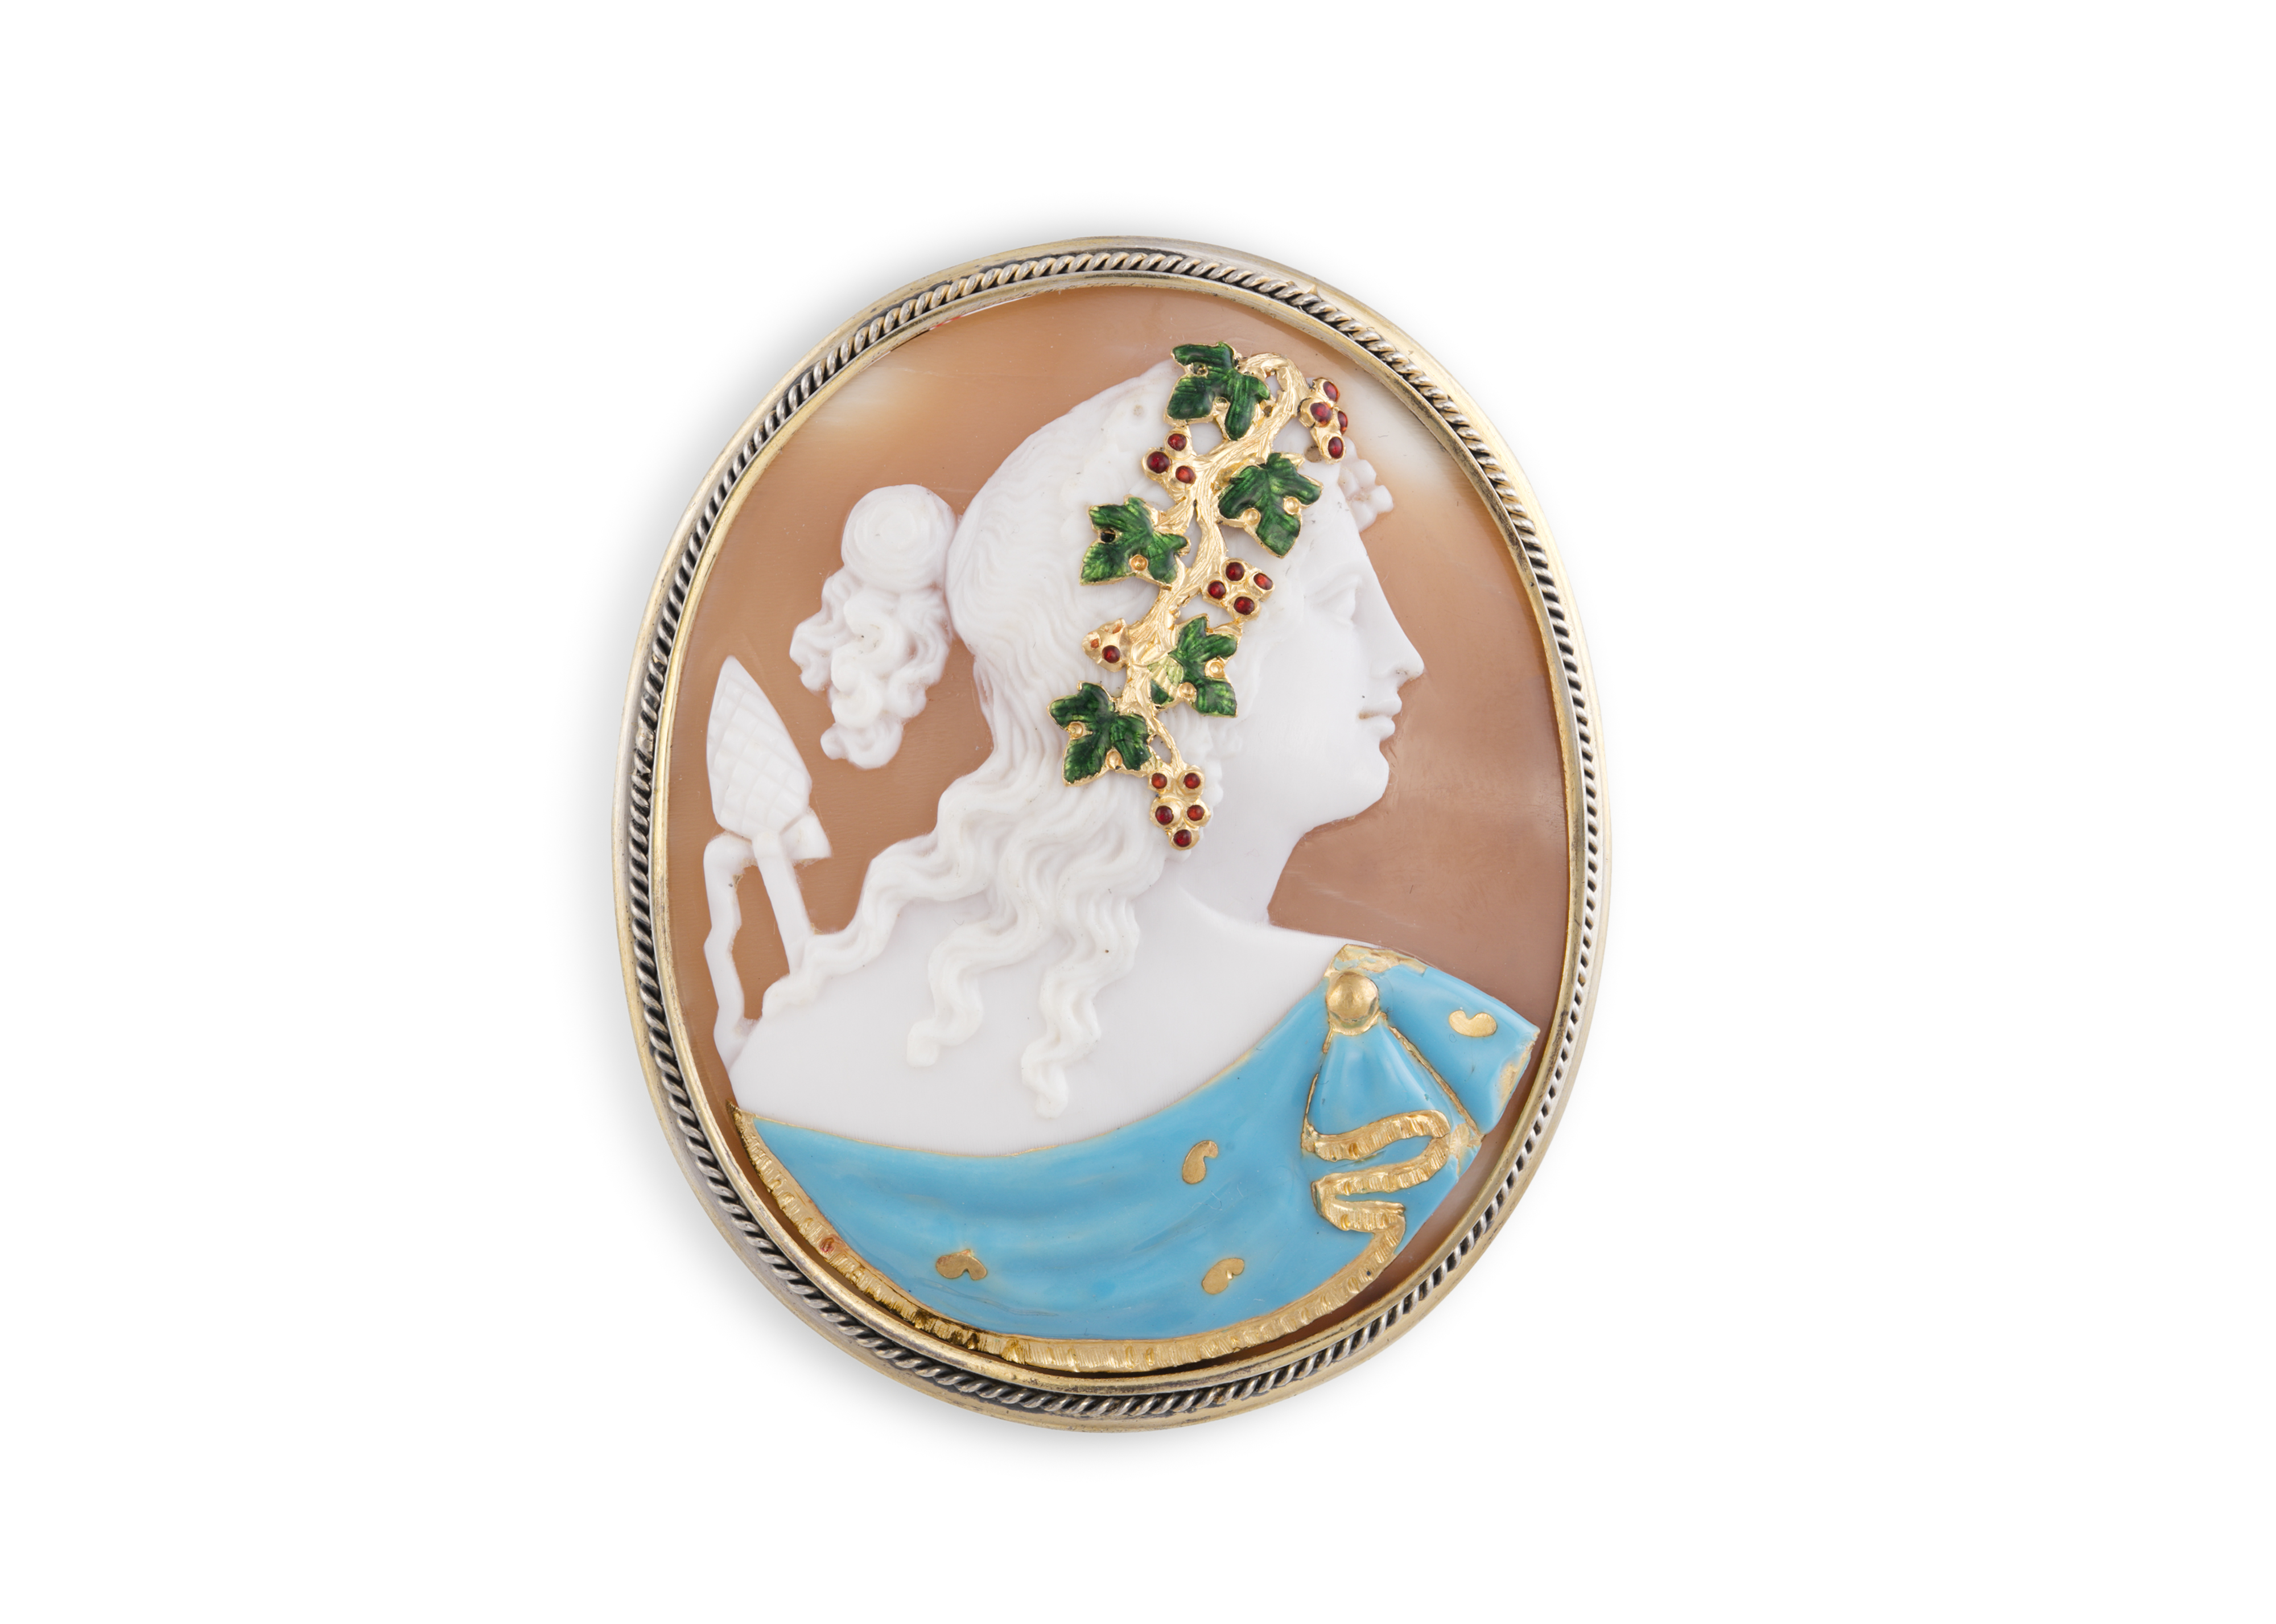 A NAPOLEONIC CAMEO BROOCH DEPICTING THE HEAD OF ARIADNE,The shell cameo depicting Ariadne or a